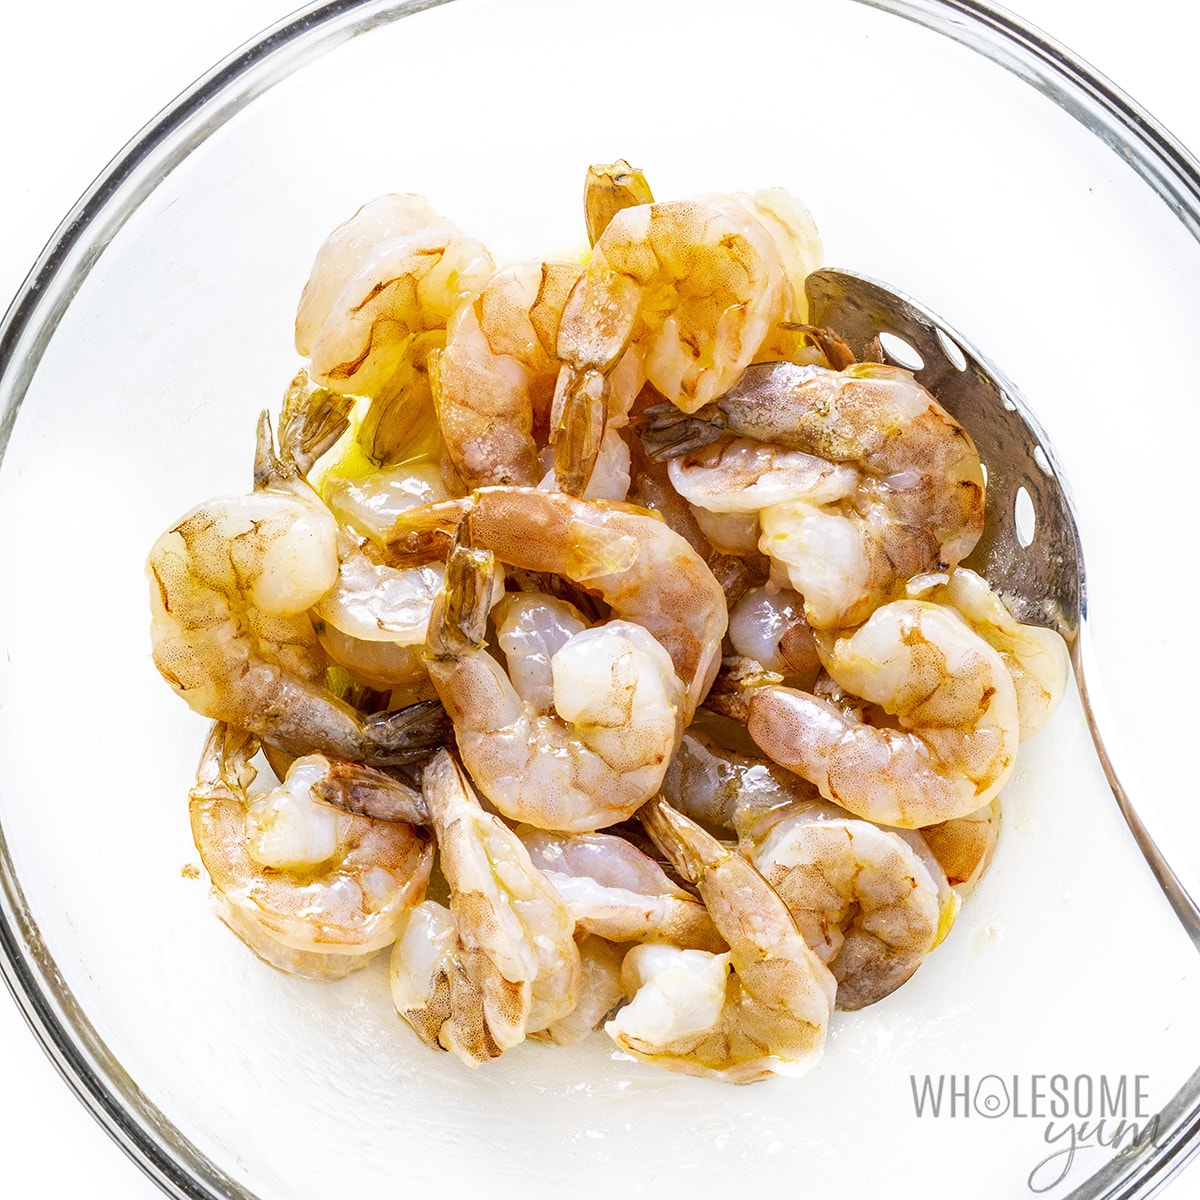 Raw shrimp tossed in oil in a bowl.